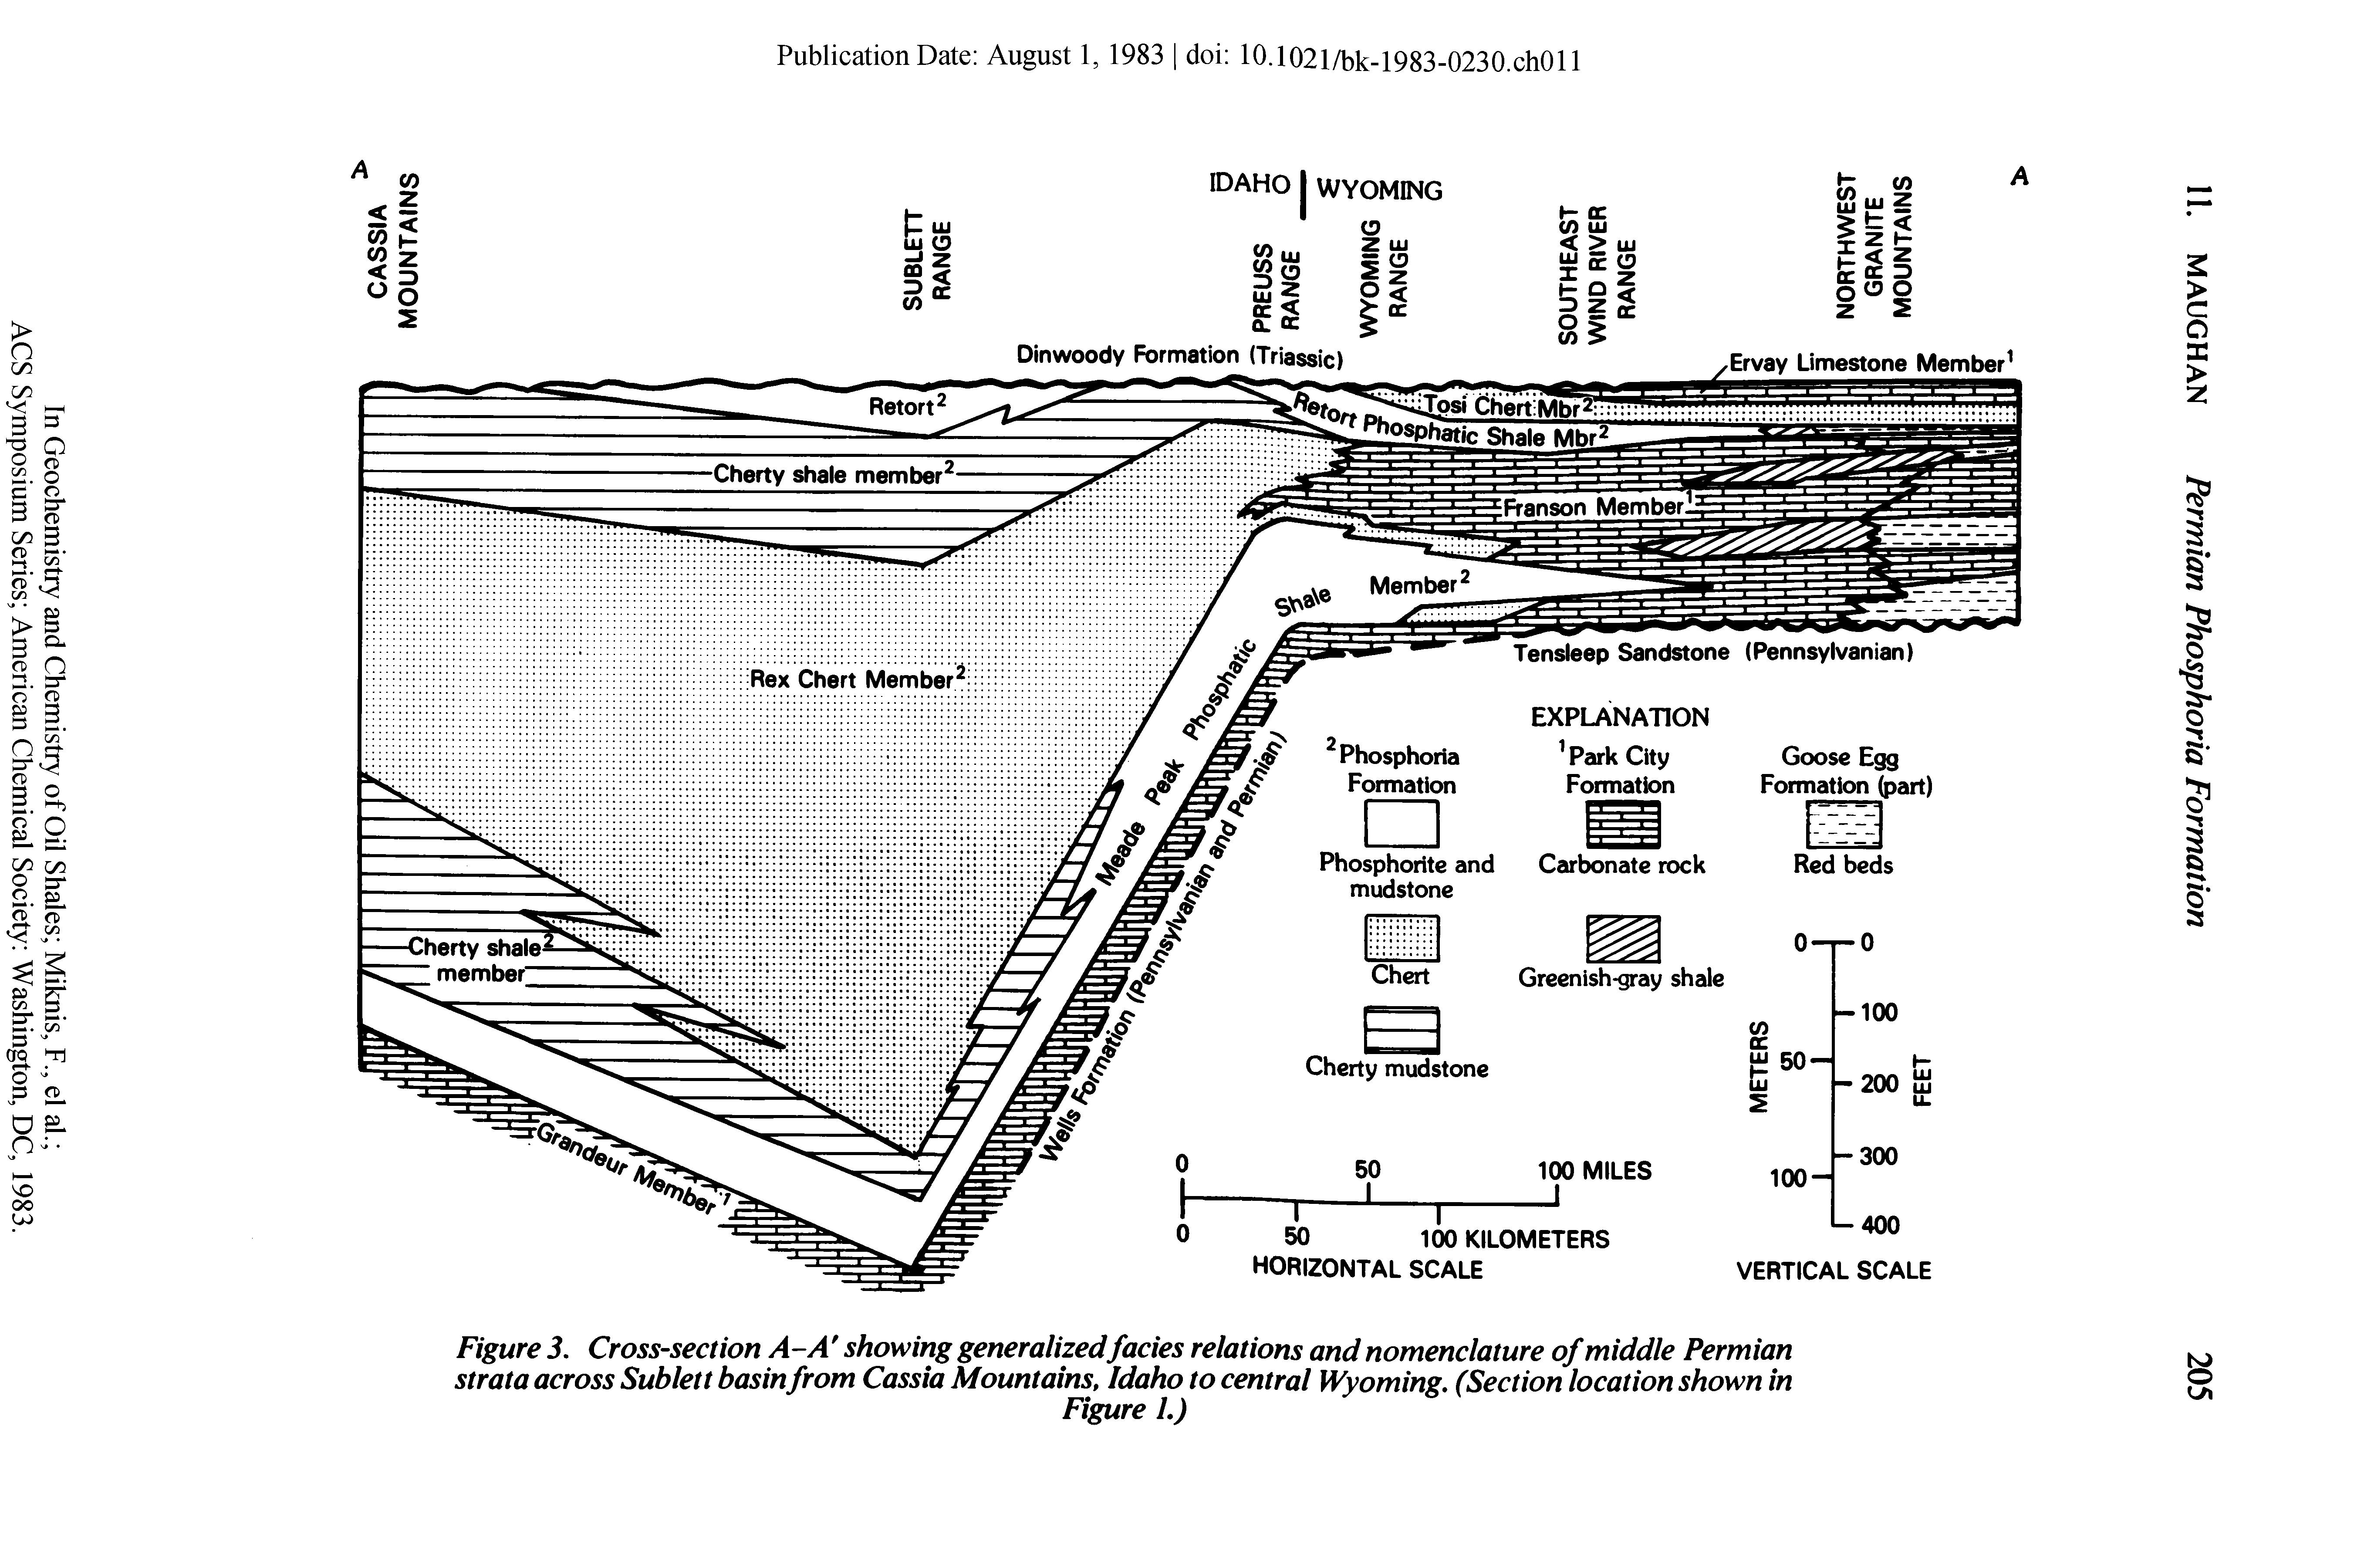 Figure 3. Cross-section A-A showing generalizedfacies relations and nomenclature of middle Permian strata across Sublett basin from Cassia Mountains, Idaho to central Wyoming. (Section location shown in...